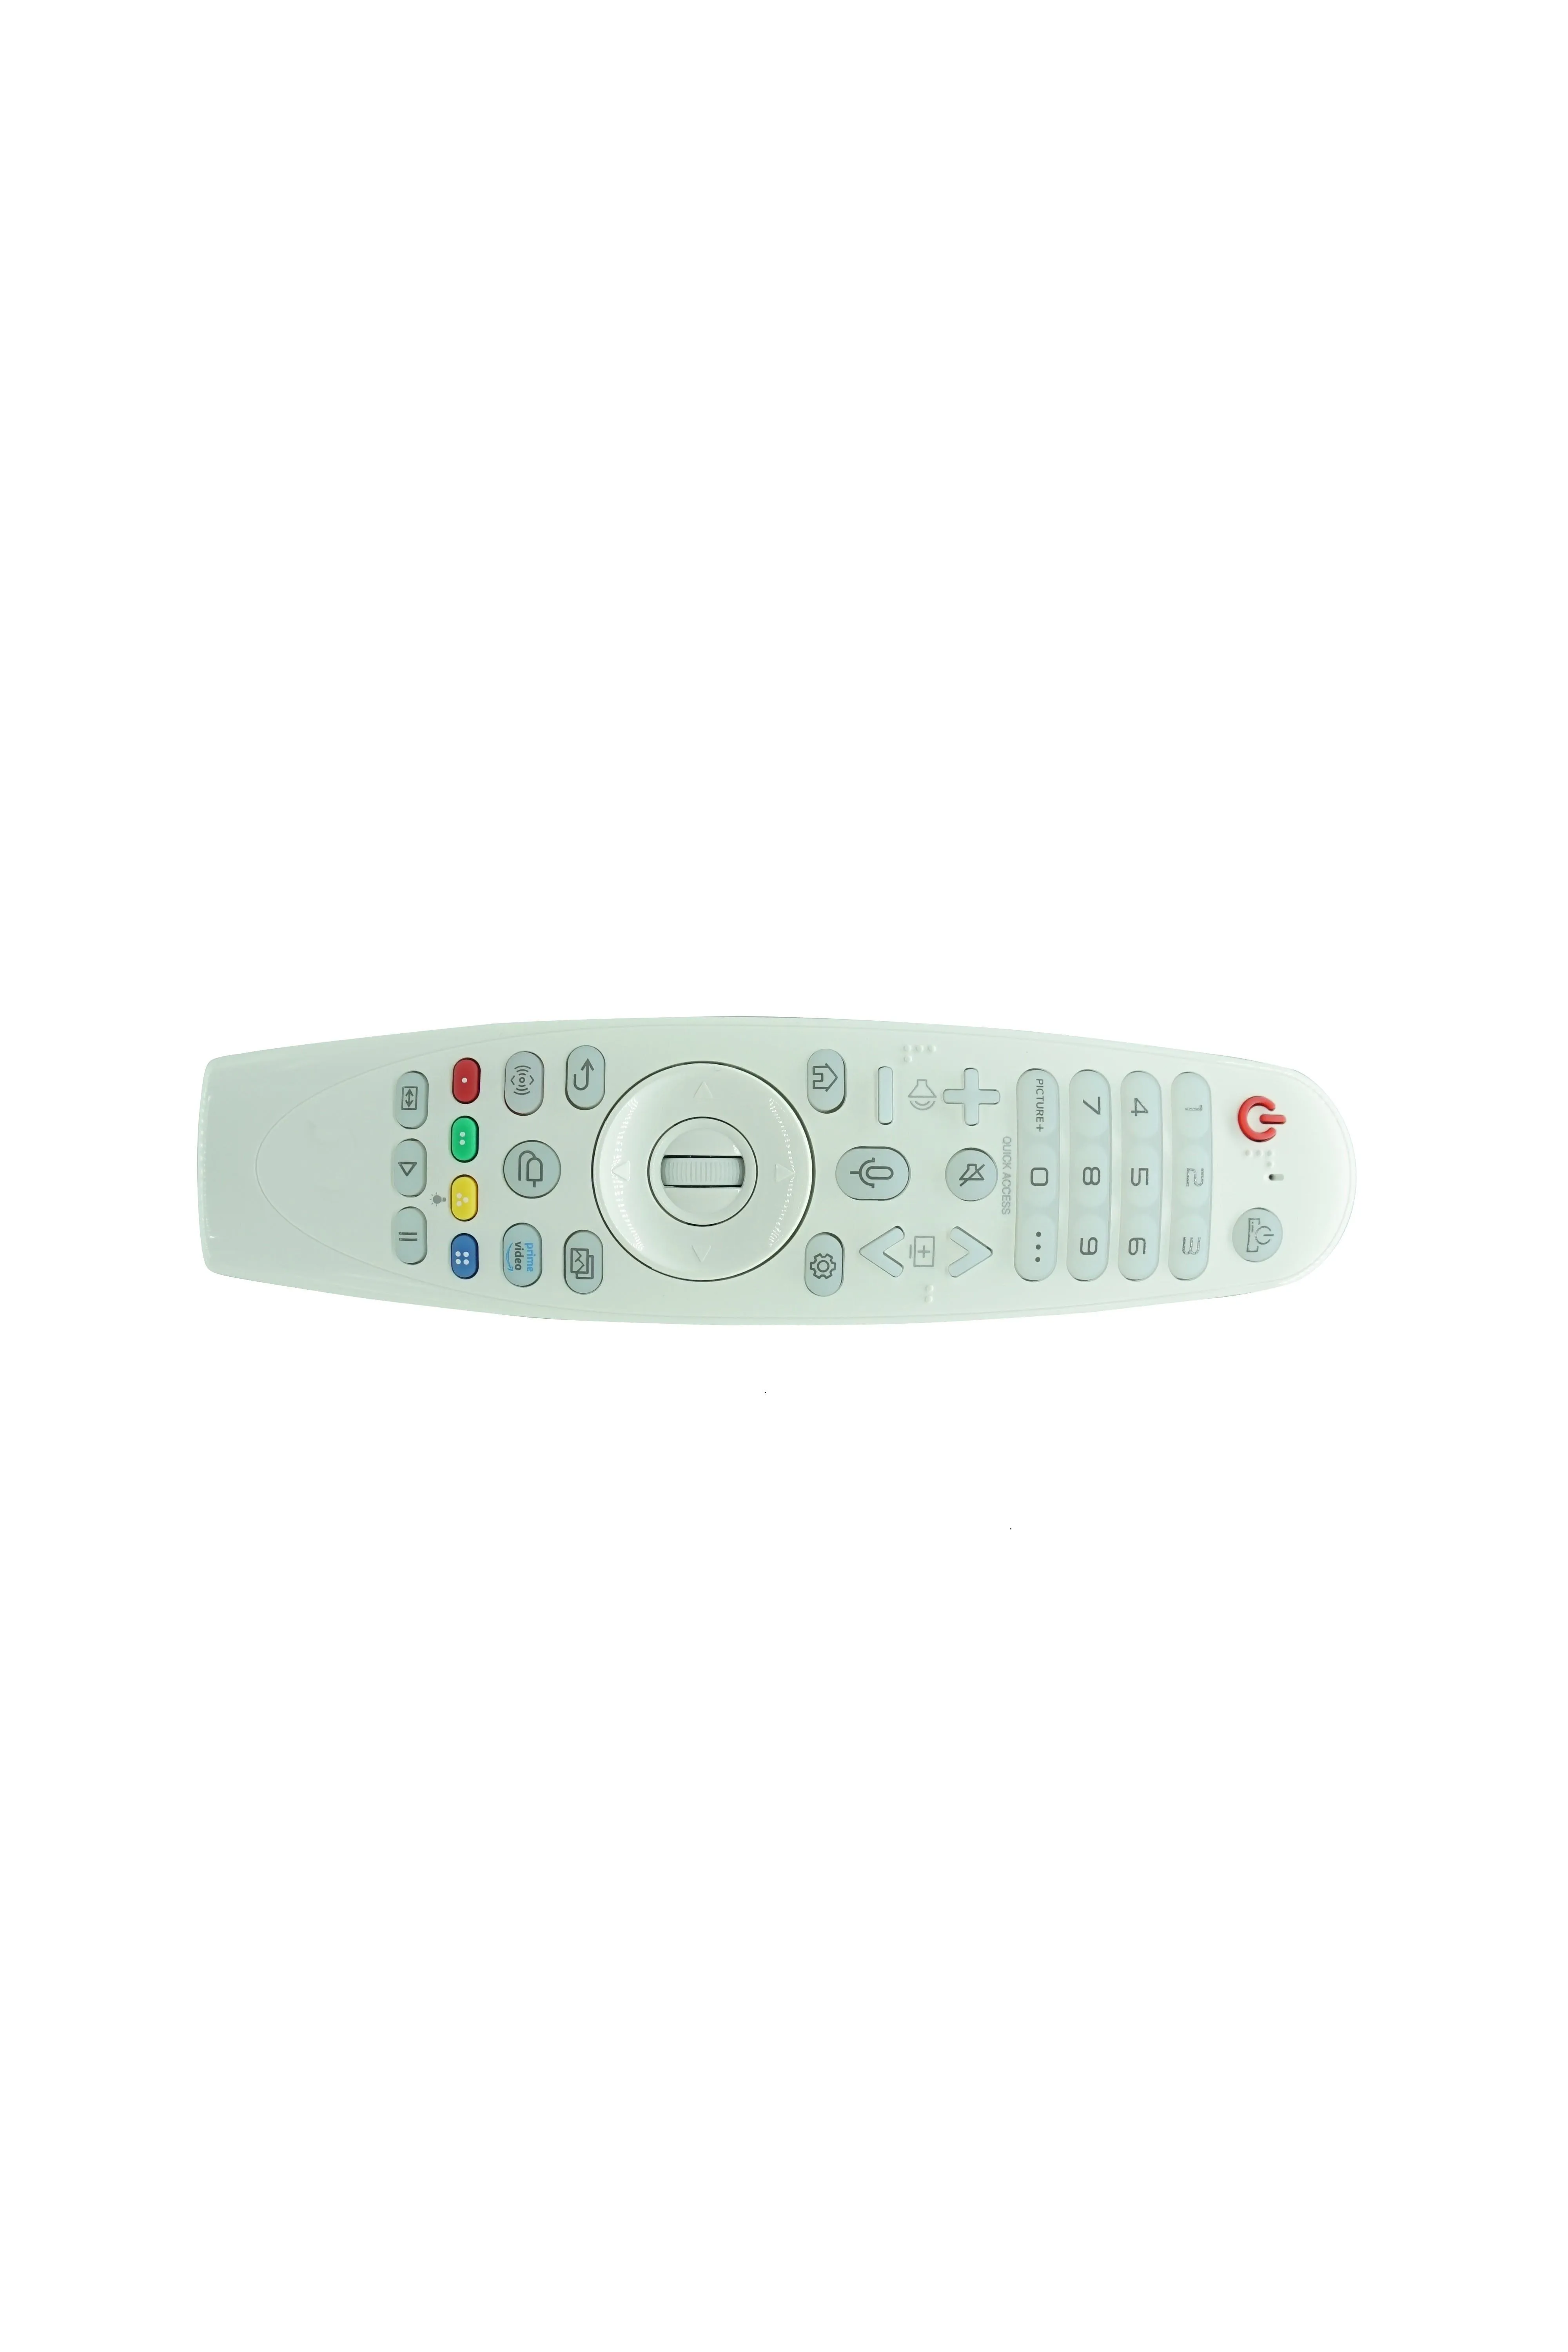 Voice Bluetooth Magic Remote Control For LG AN-MR21GC AN-MR21GA 43NANO753PR 43NANO756PR 43UP77009LB 43UP81006LR 4K Ultra HD UHD Smart HDTV TV Not Voice